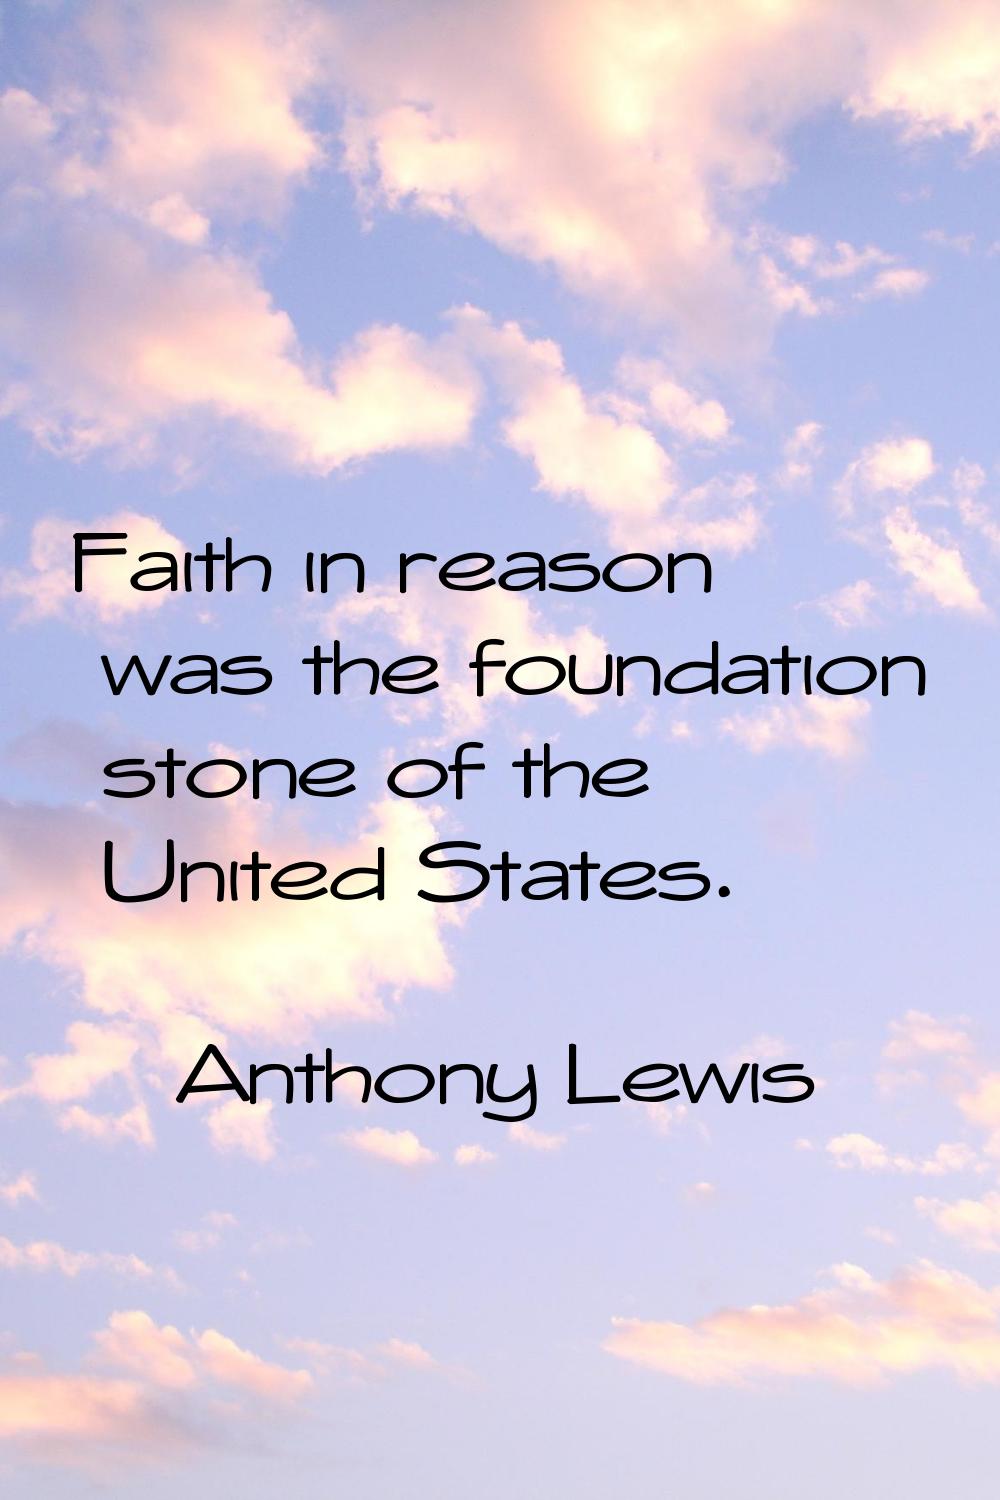 Faith in reason was the foundation stone of the United States.